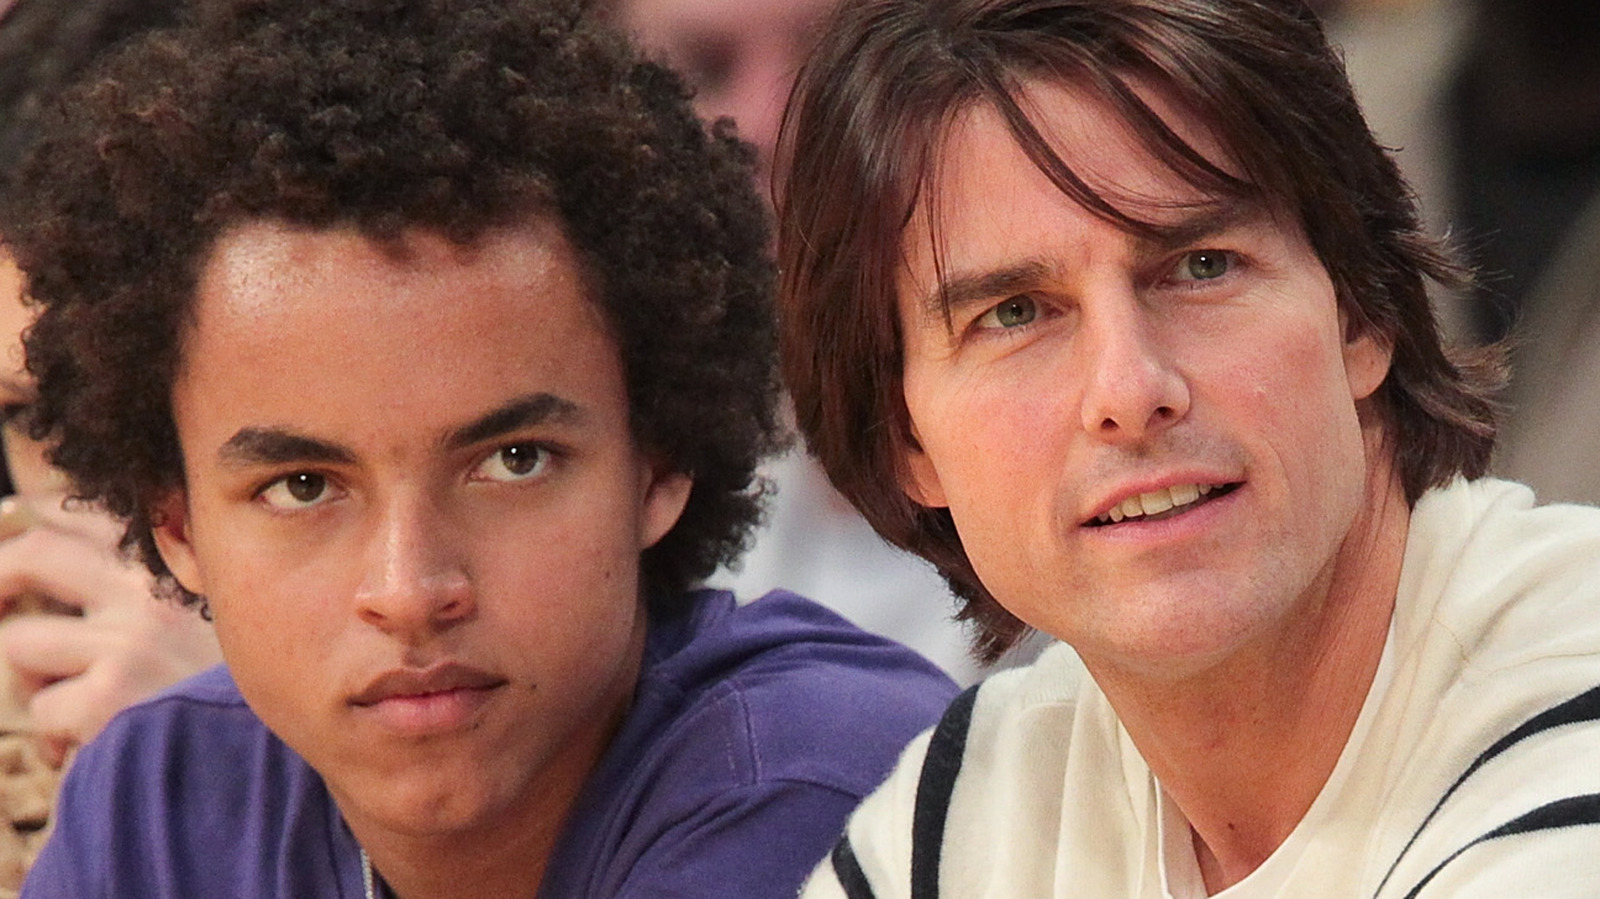 Details About Tom Cruise's Relationship With His Only Son Connor